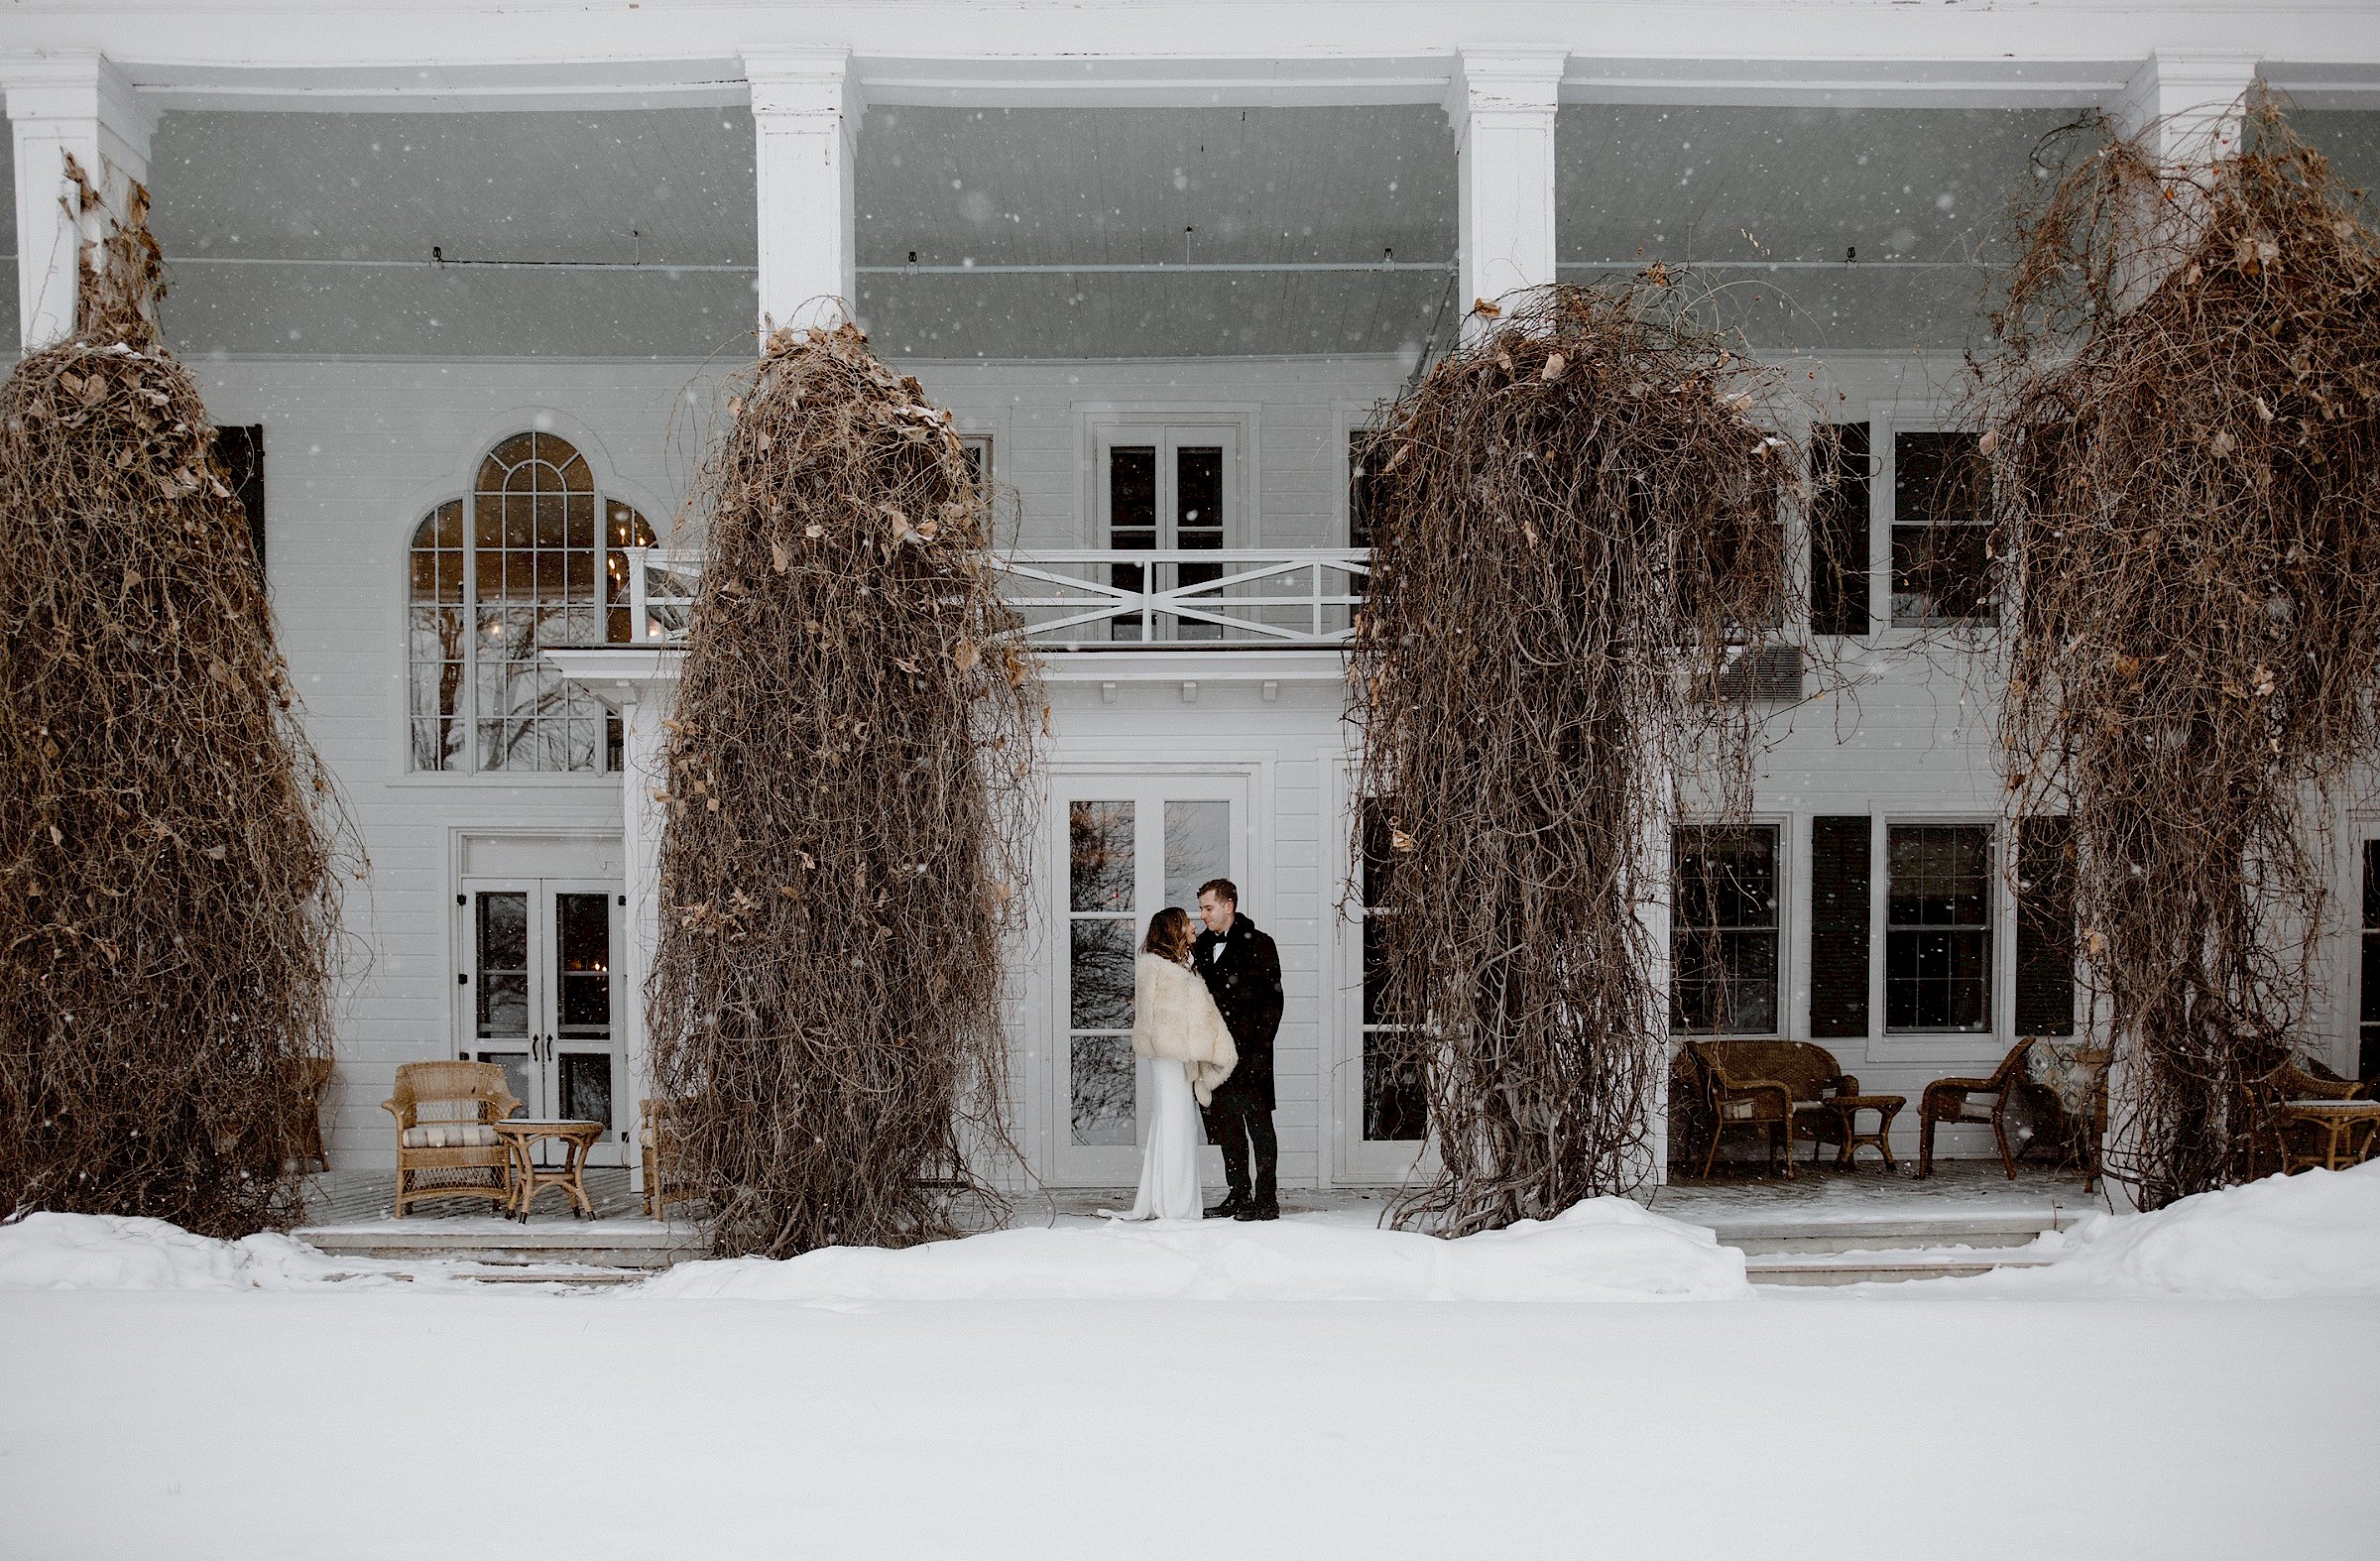 The groom and bride under the snowflakes in front of the Manor